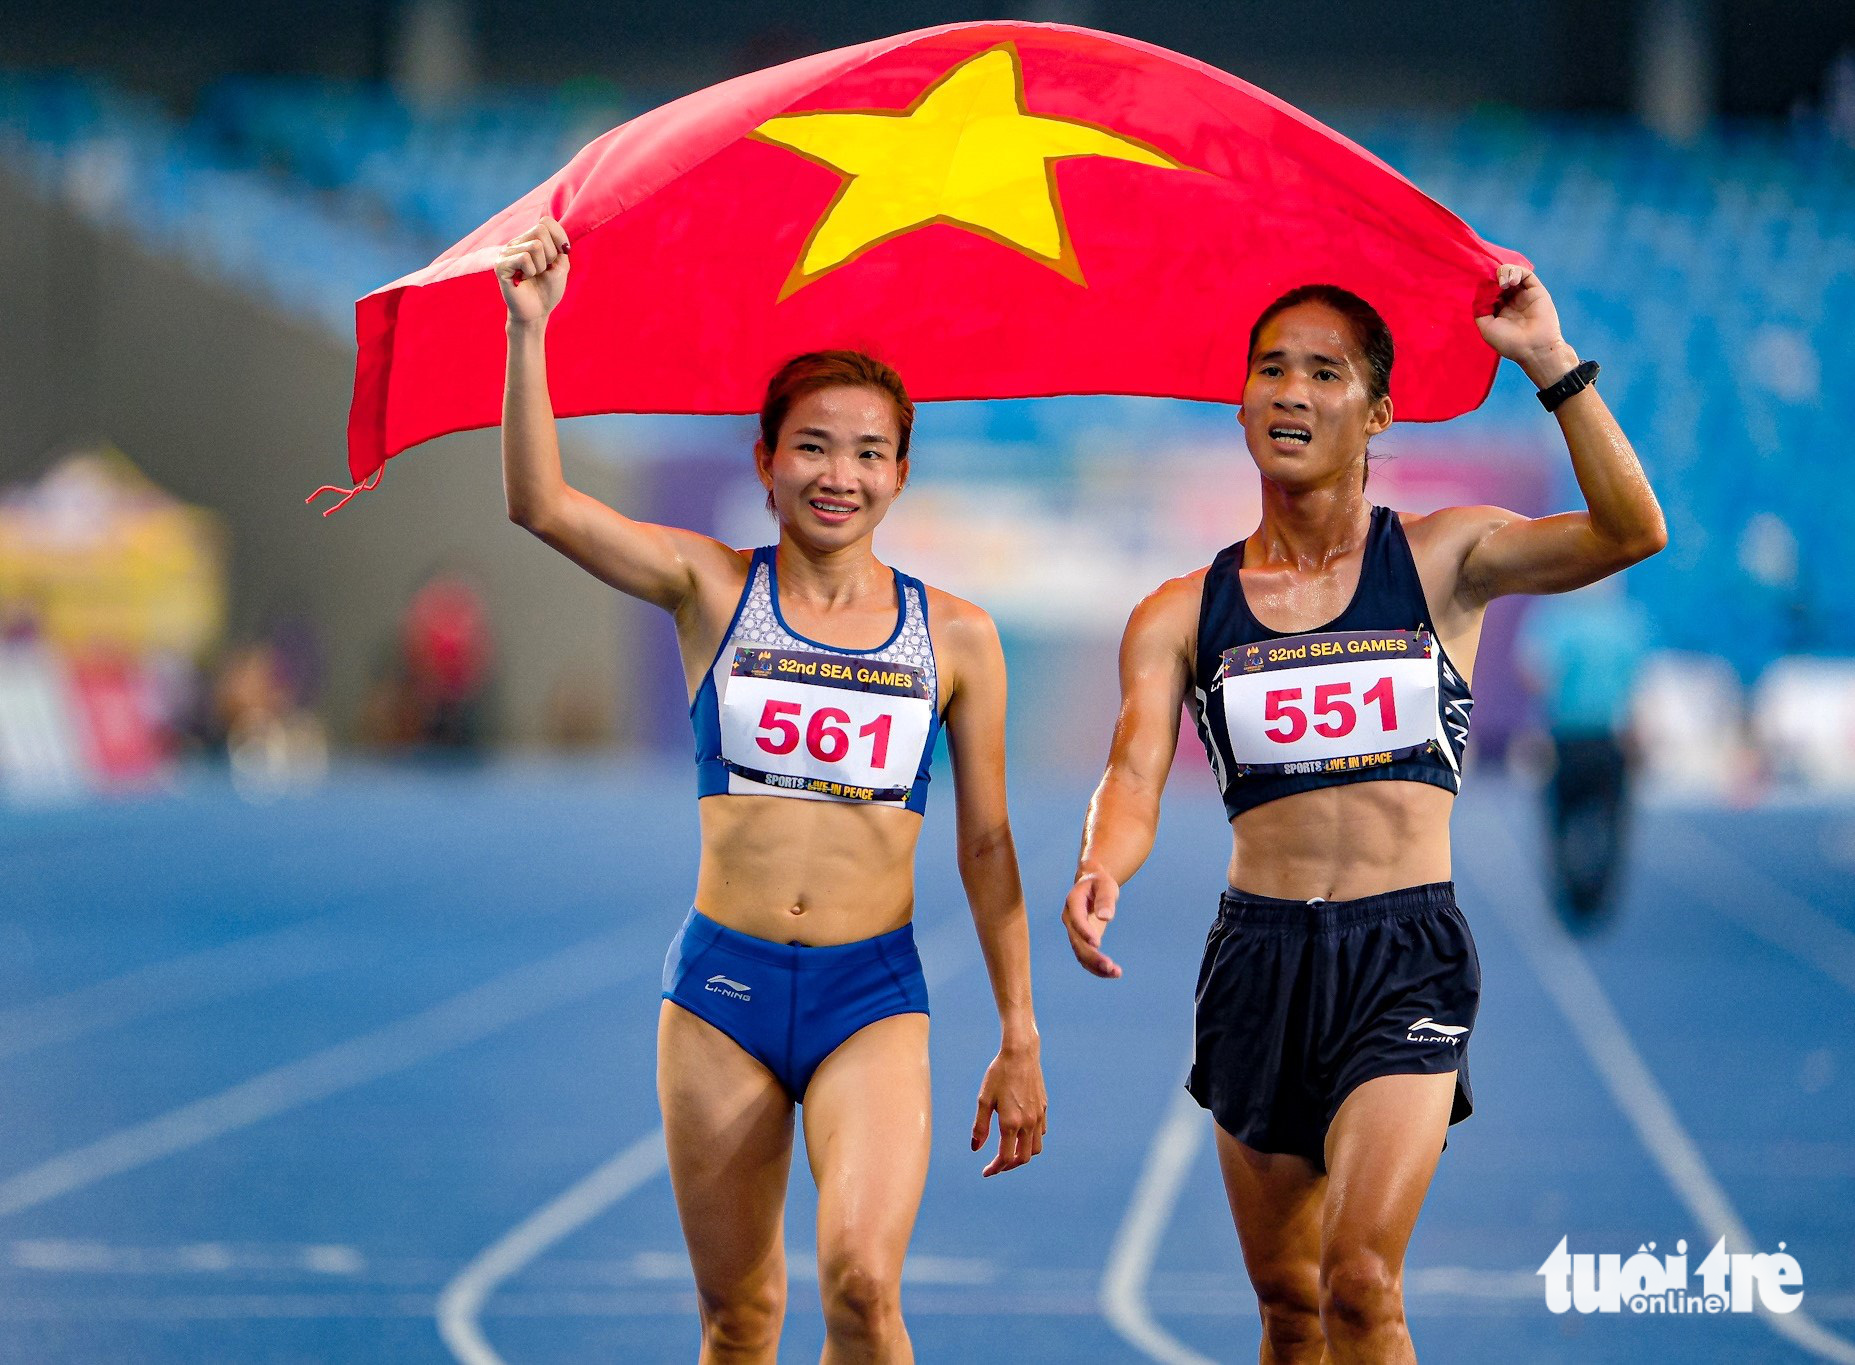 Vietnamese runner Nguyen Thi Oanh (L) beams with joy while wearing the national flag alongside a teammate after they competed in the women's events at the 2023 Southeast Asian Games in Cambodia, May 9, 2023. Photo: Nam Tran / Tuoi Tre